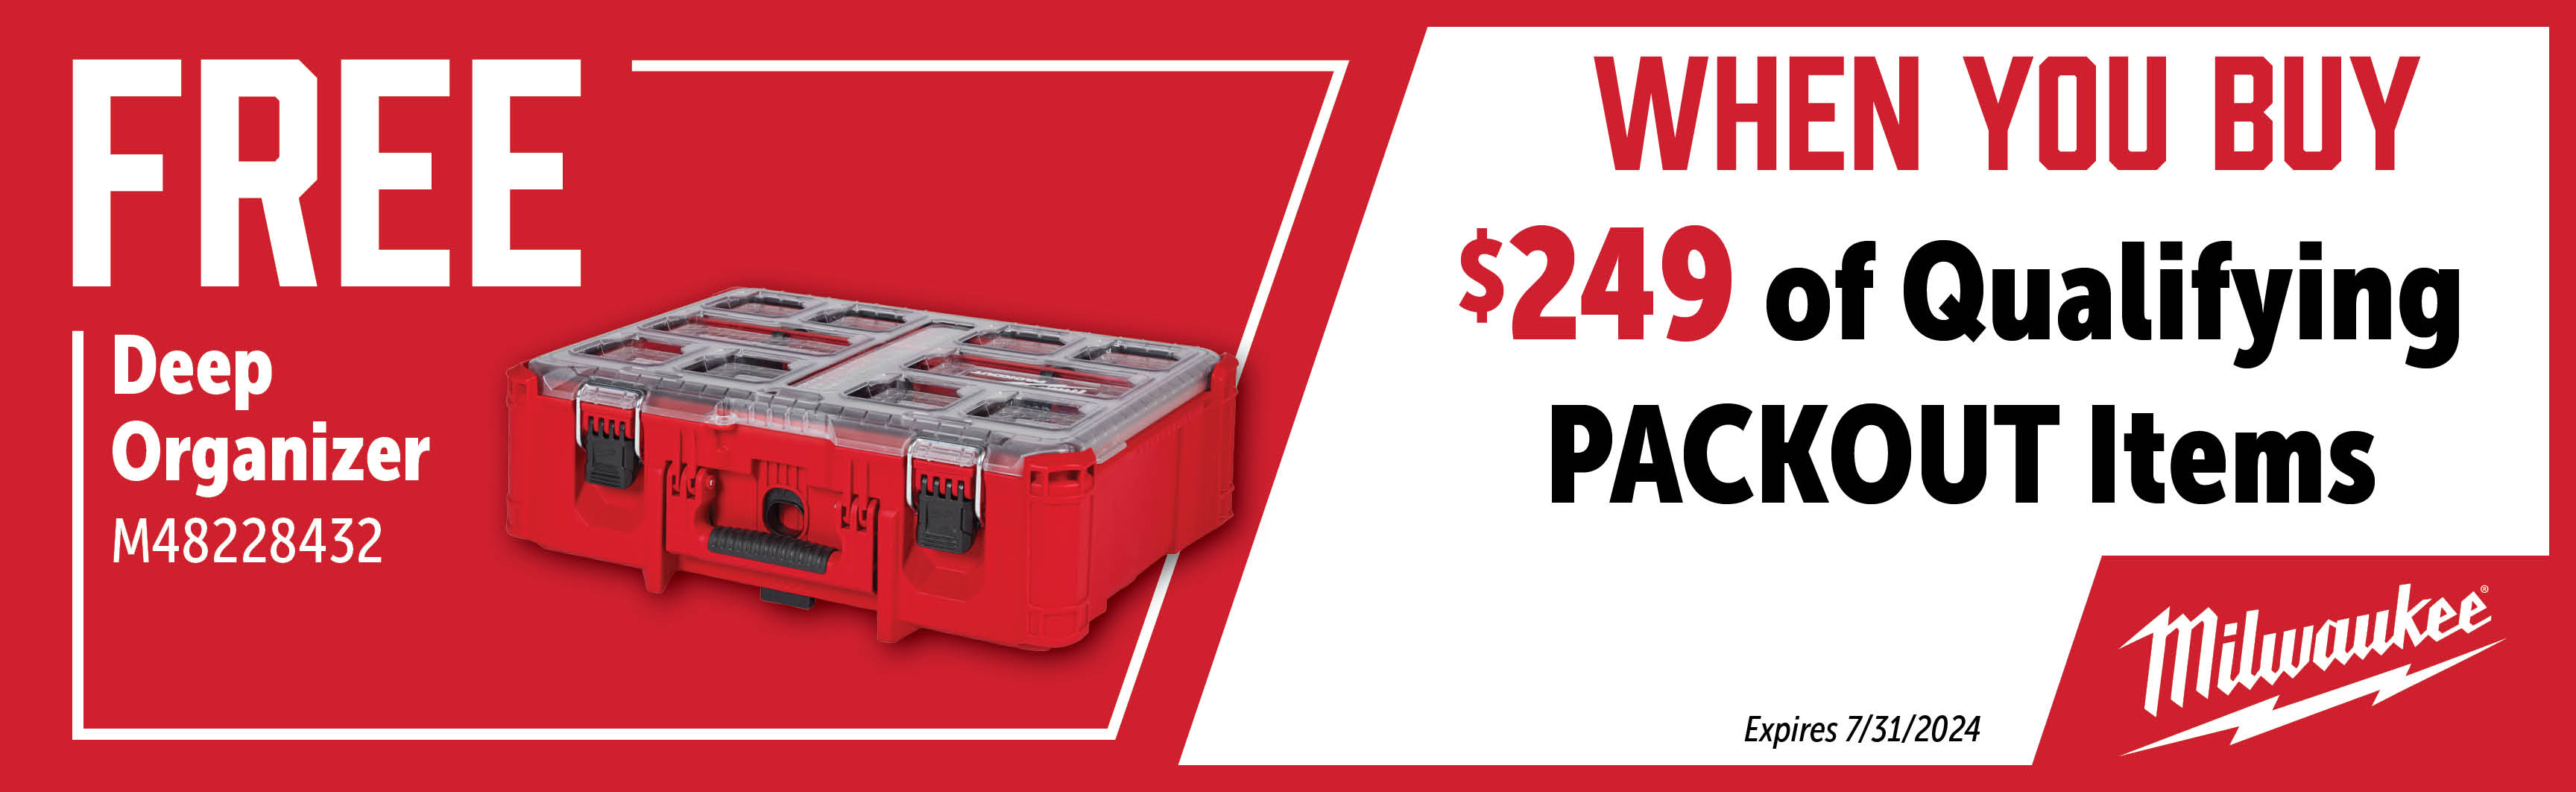 Milwaukee May - July: Buy $249 of Qualifying Packout and Get a Free M48228432